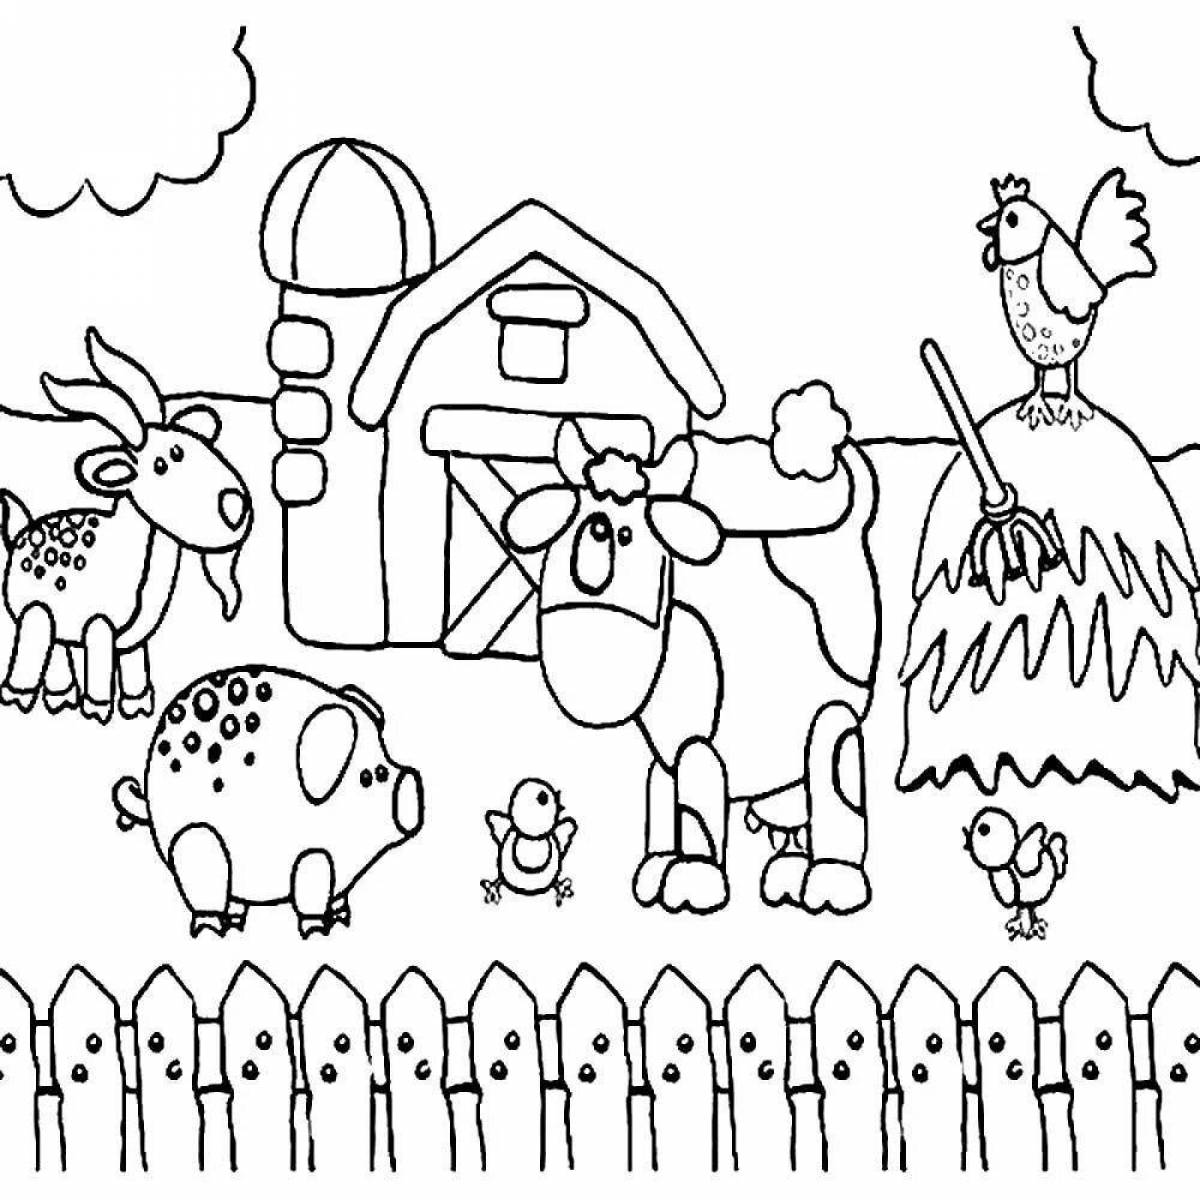 Coloring book shining cow